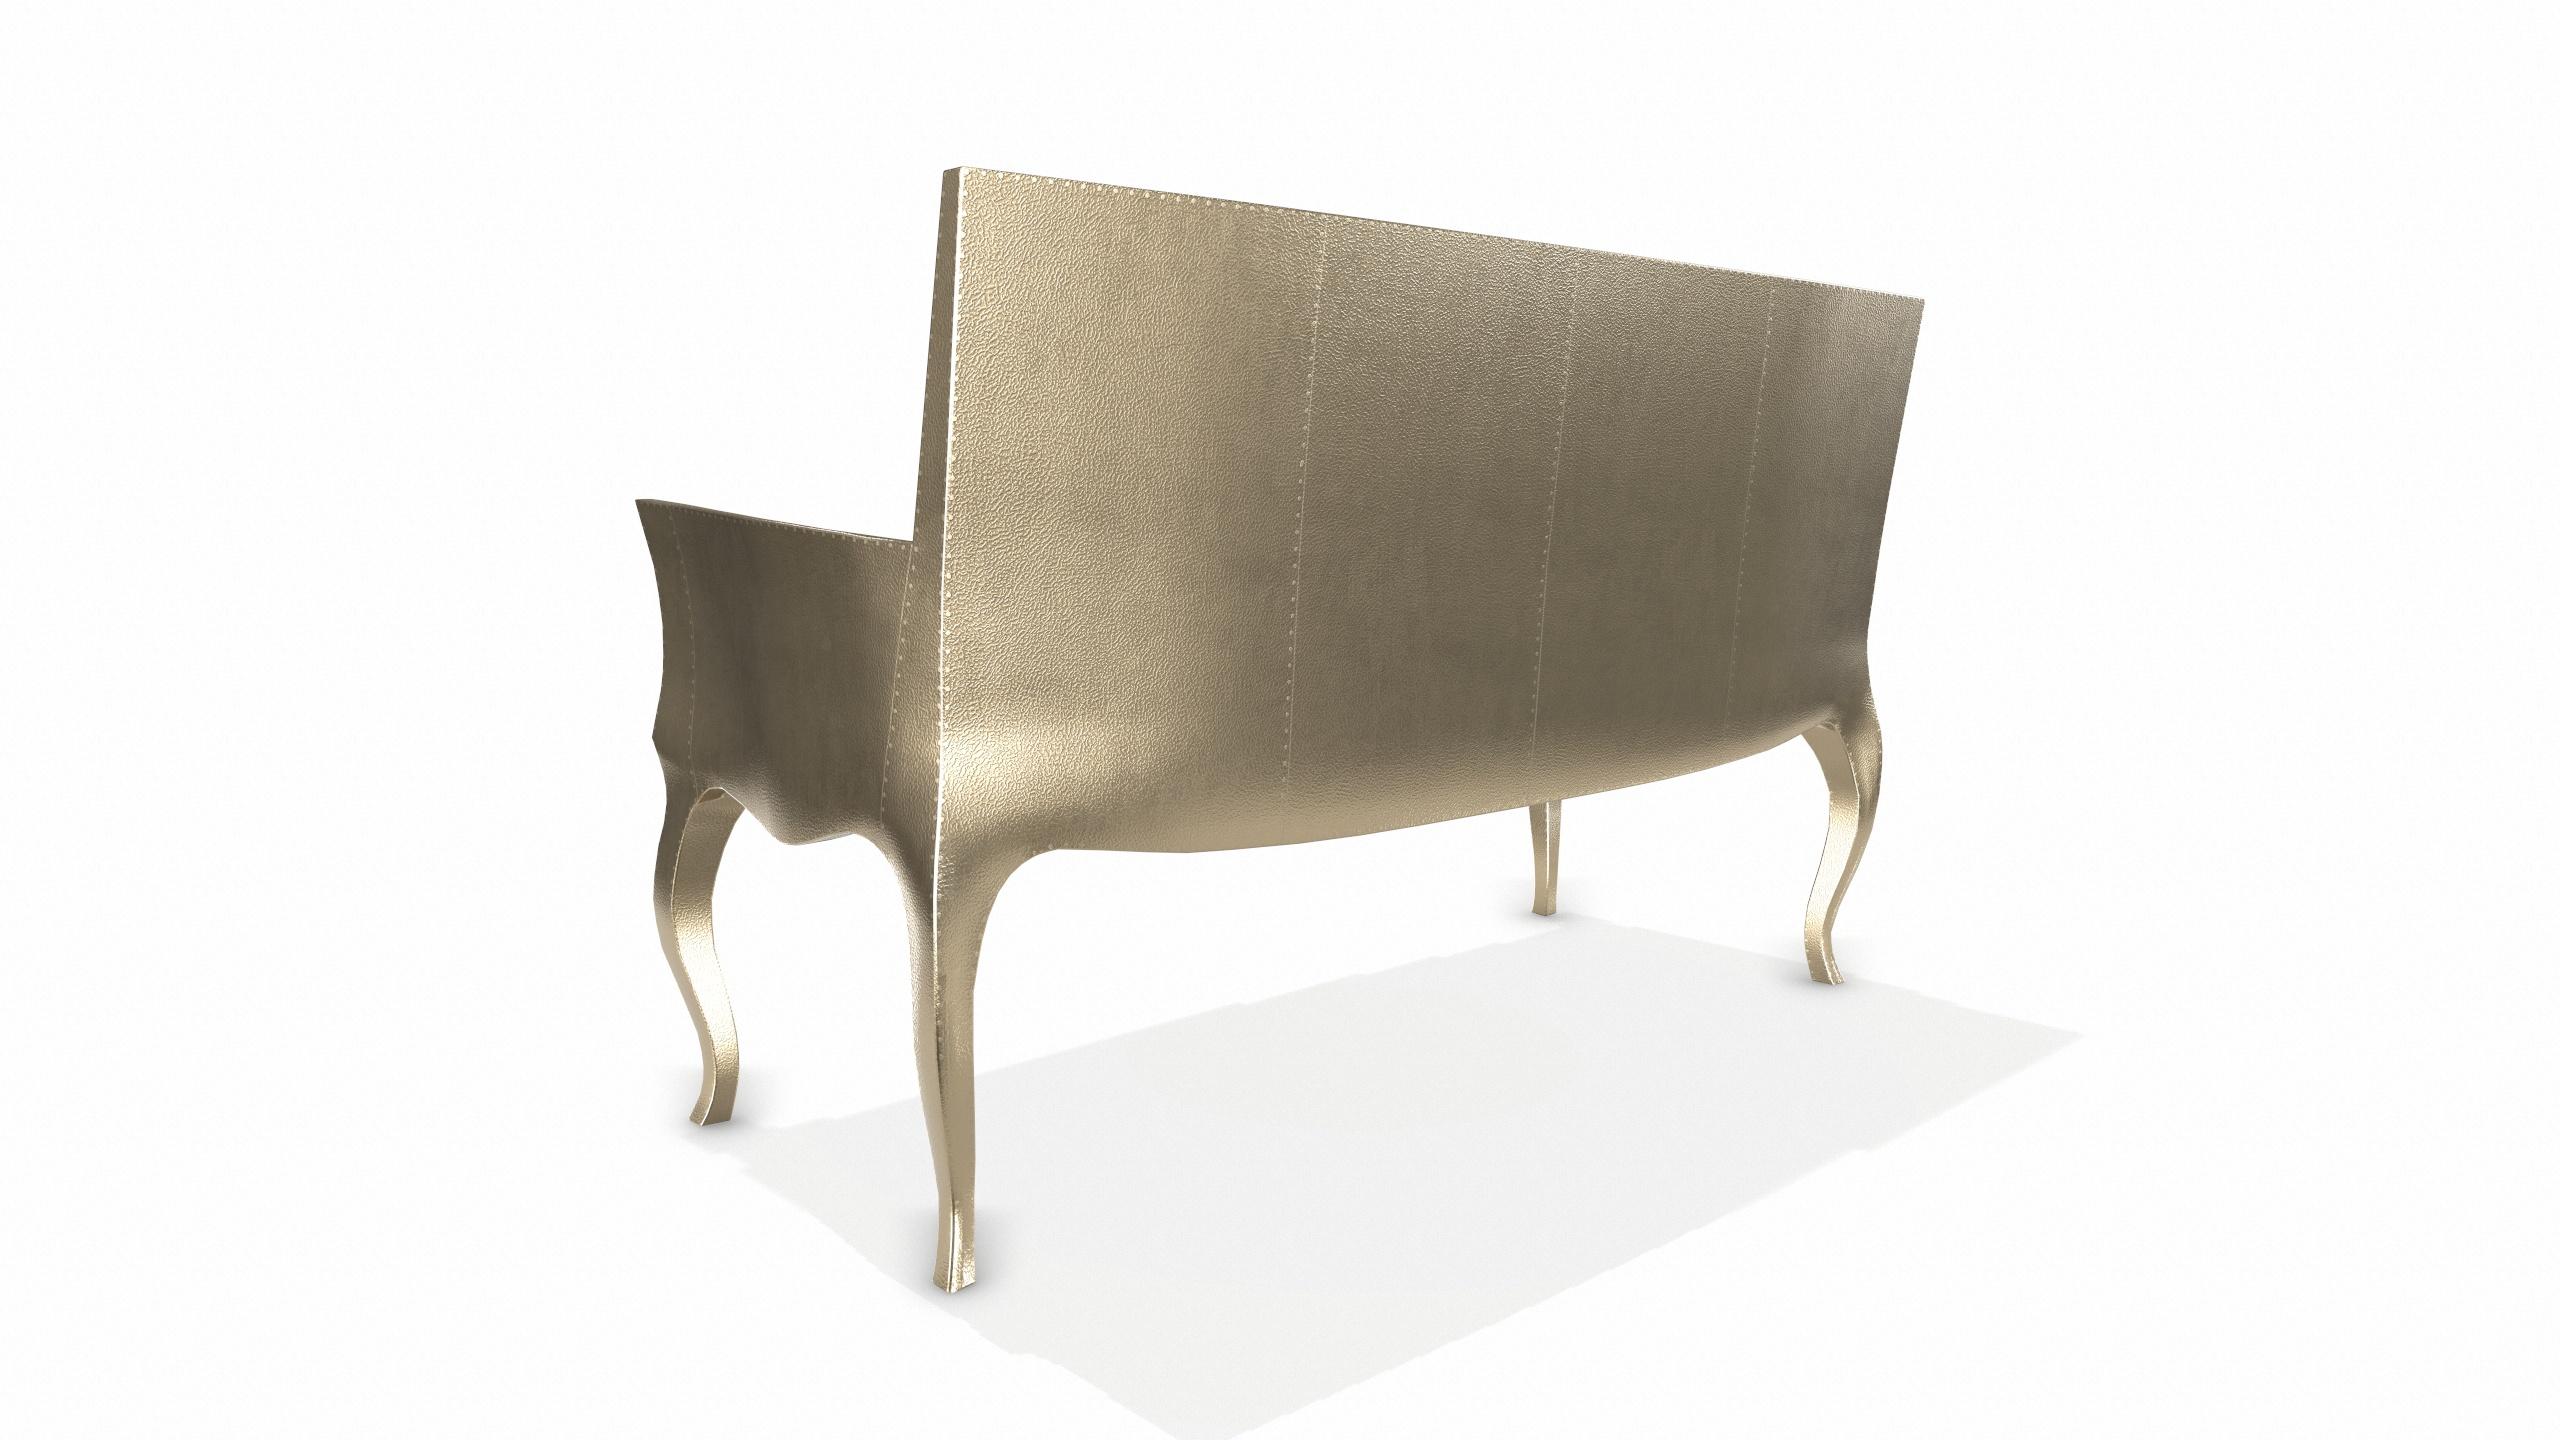 Other Louise Settee Art Deco Benches in Fine Hammered Brass by Paul Mathieu For Sale